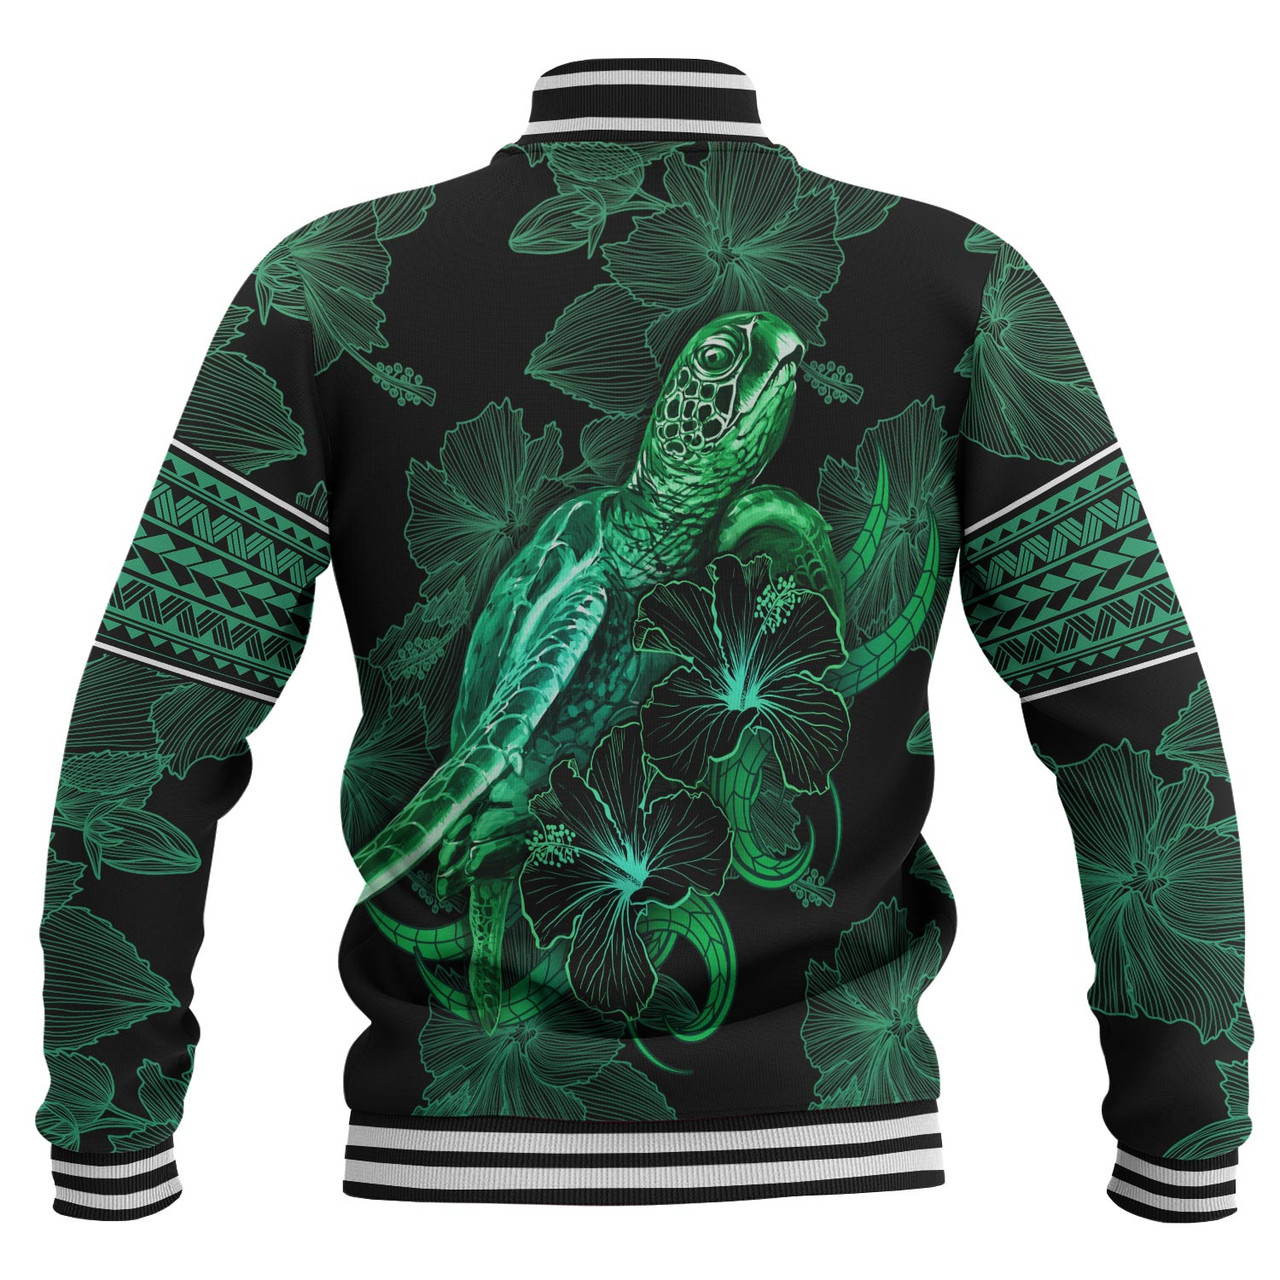 New Zealand Baseball Jacket  Sea Turtle With Blooming Hibiscus Flowers Tribal Green